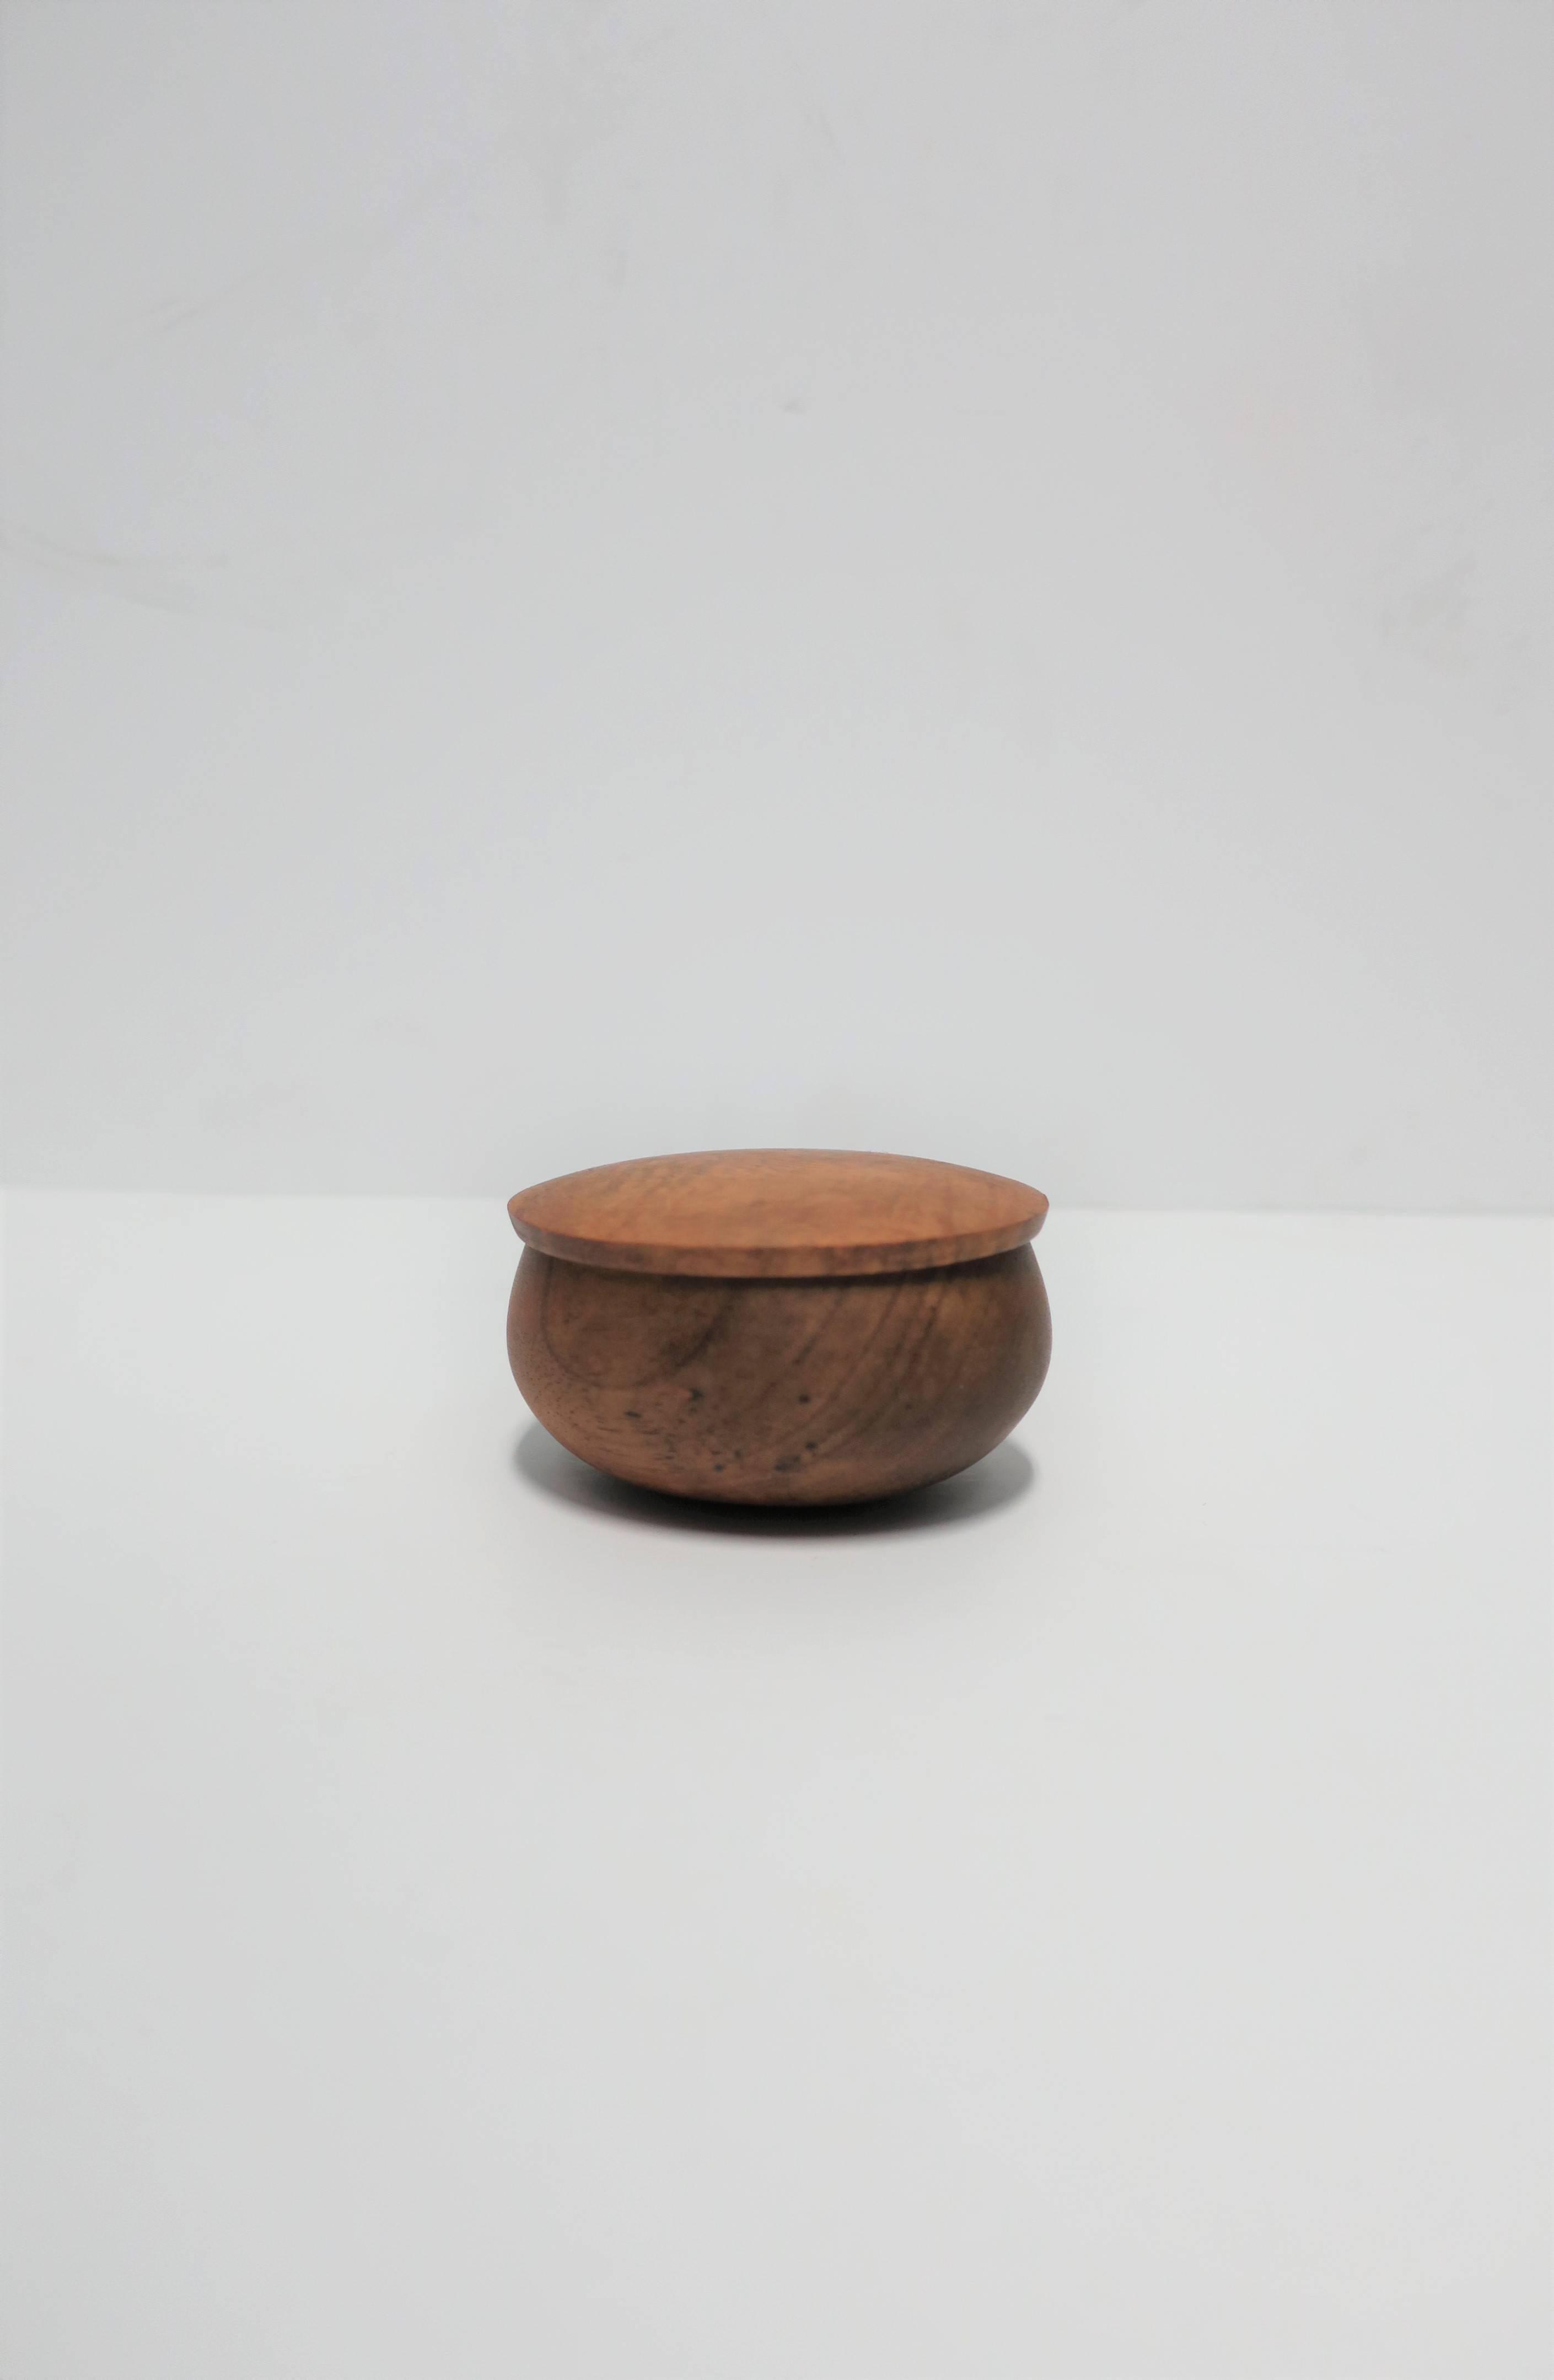 A small round wood hand-crafted jewelry box, circa late-20th. Piece is signed and dated ('00) on bottom as shown in last image. A great piece for a vanity, dresser, desk, etc. Dimensions: 1.75